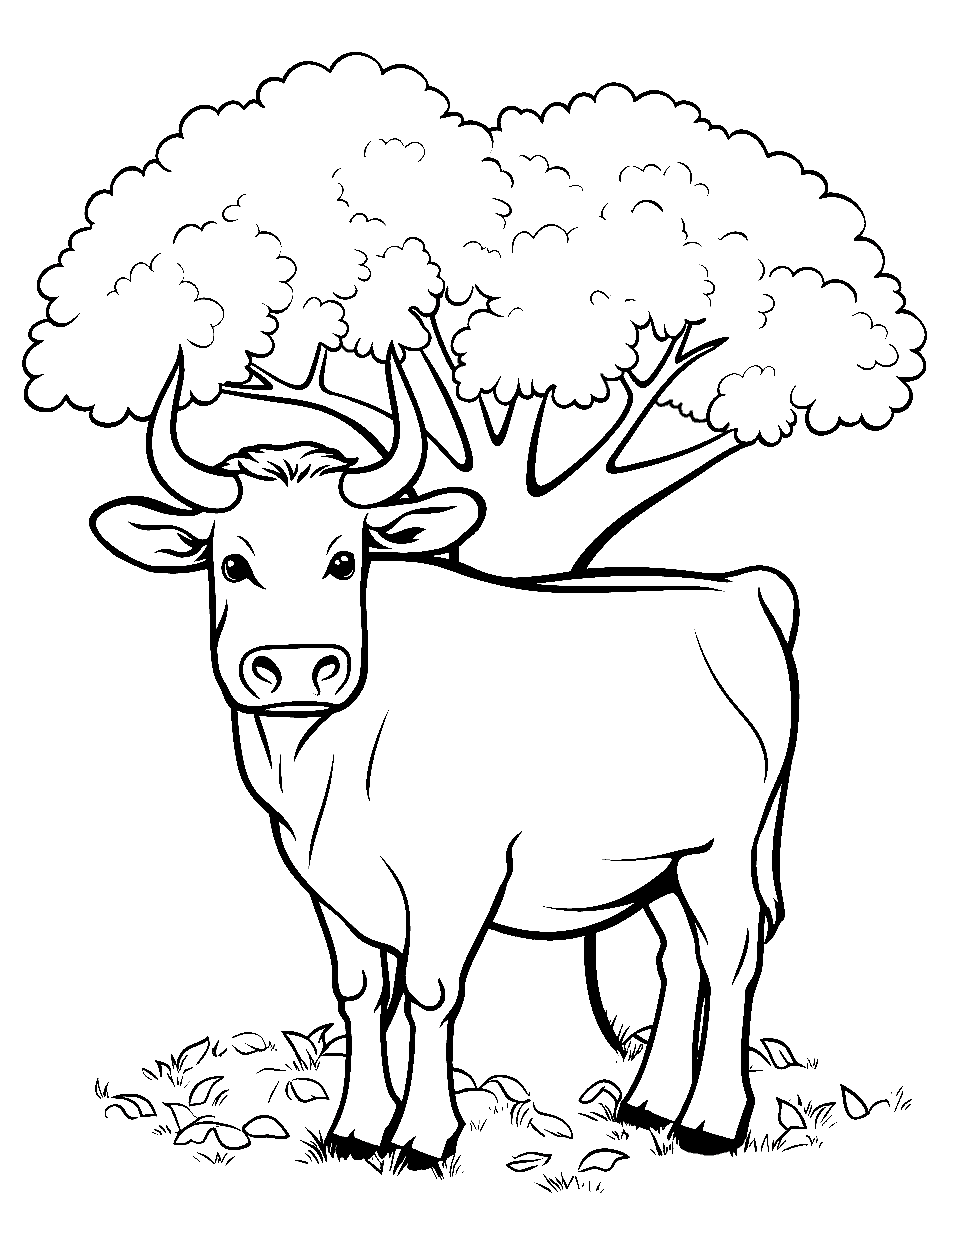 Cow Under the Simple Tree Coloring Page - A cow, taking shelter under a single, easy-to-color tree.